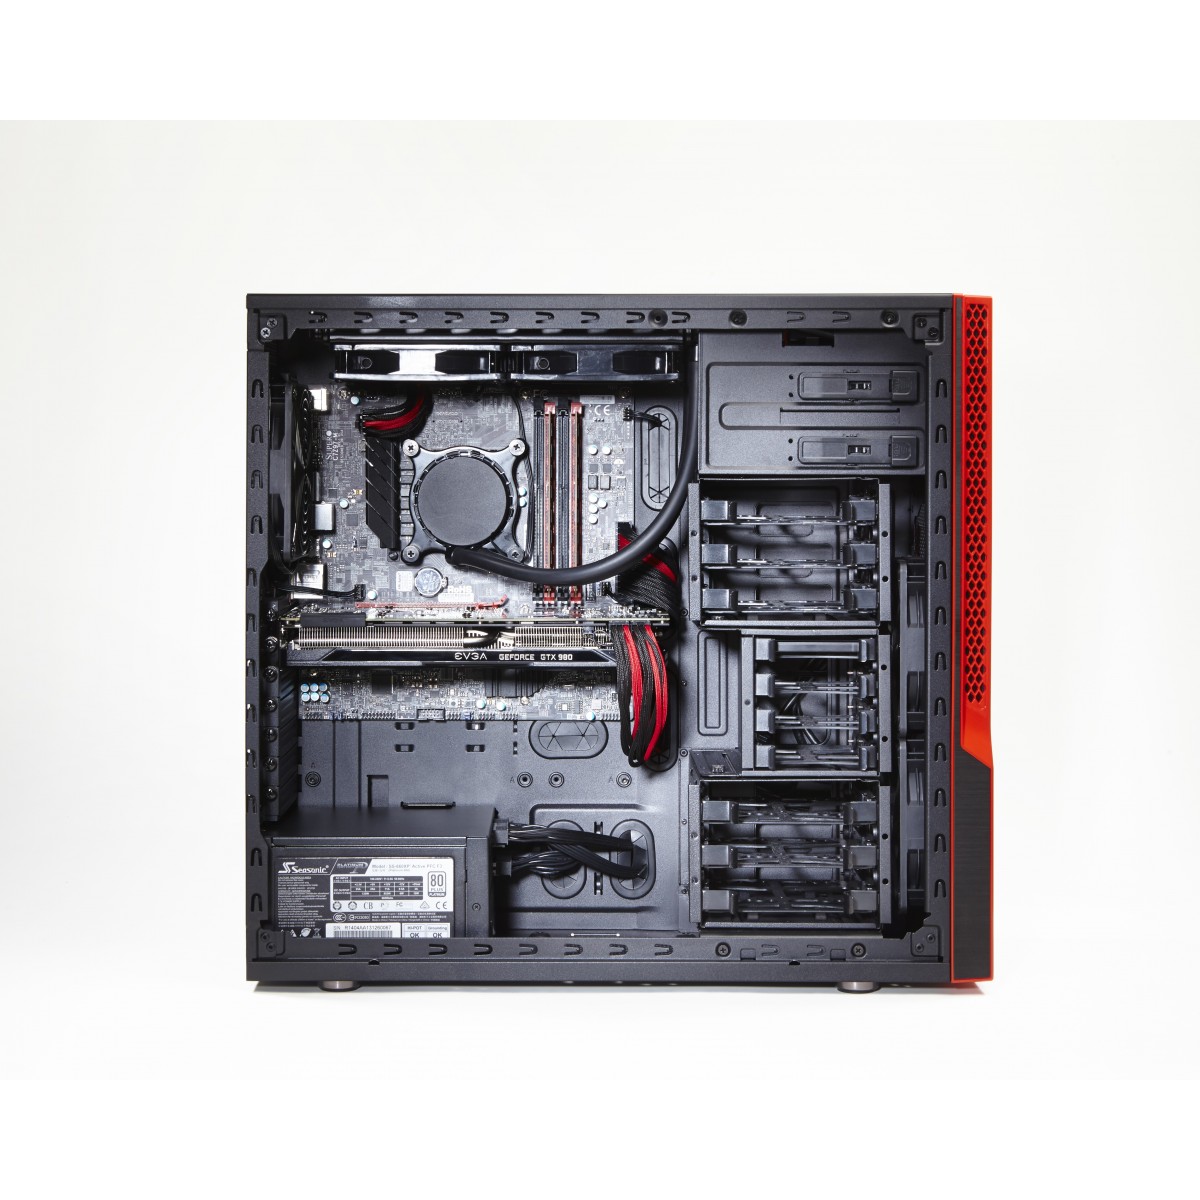 Supermicro S5 GS50-000R Mid-Tower Workstation / Gaming Case - Midi Tower - PC - ABS synthetics - Aluminium - SGCC - Black - Red 